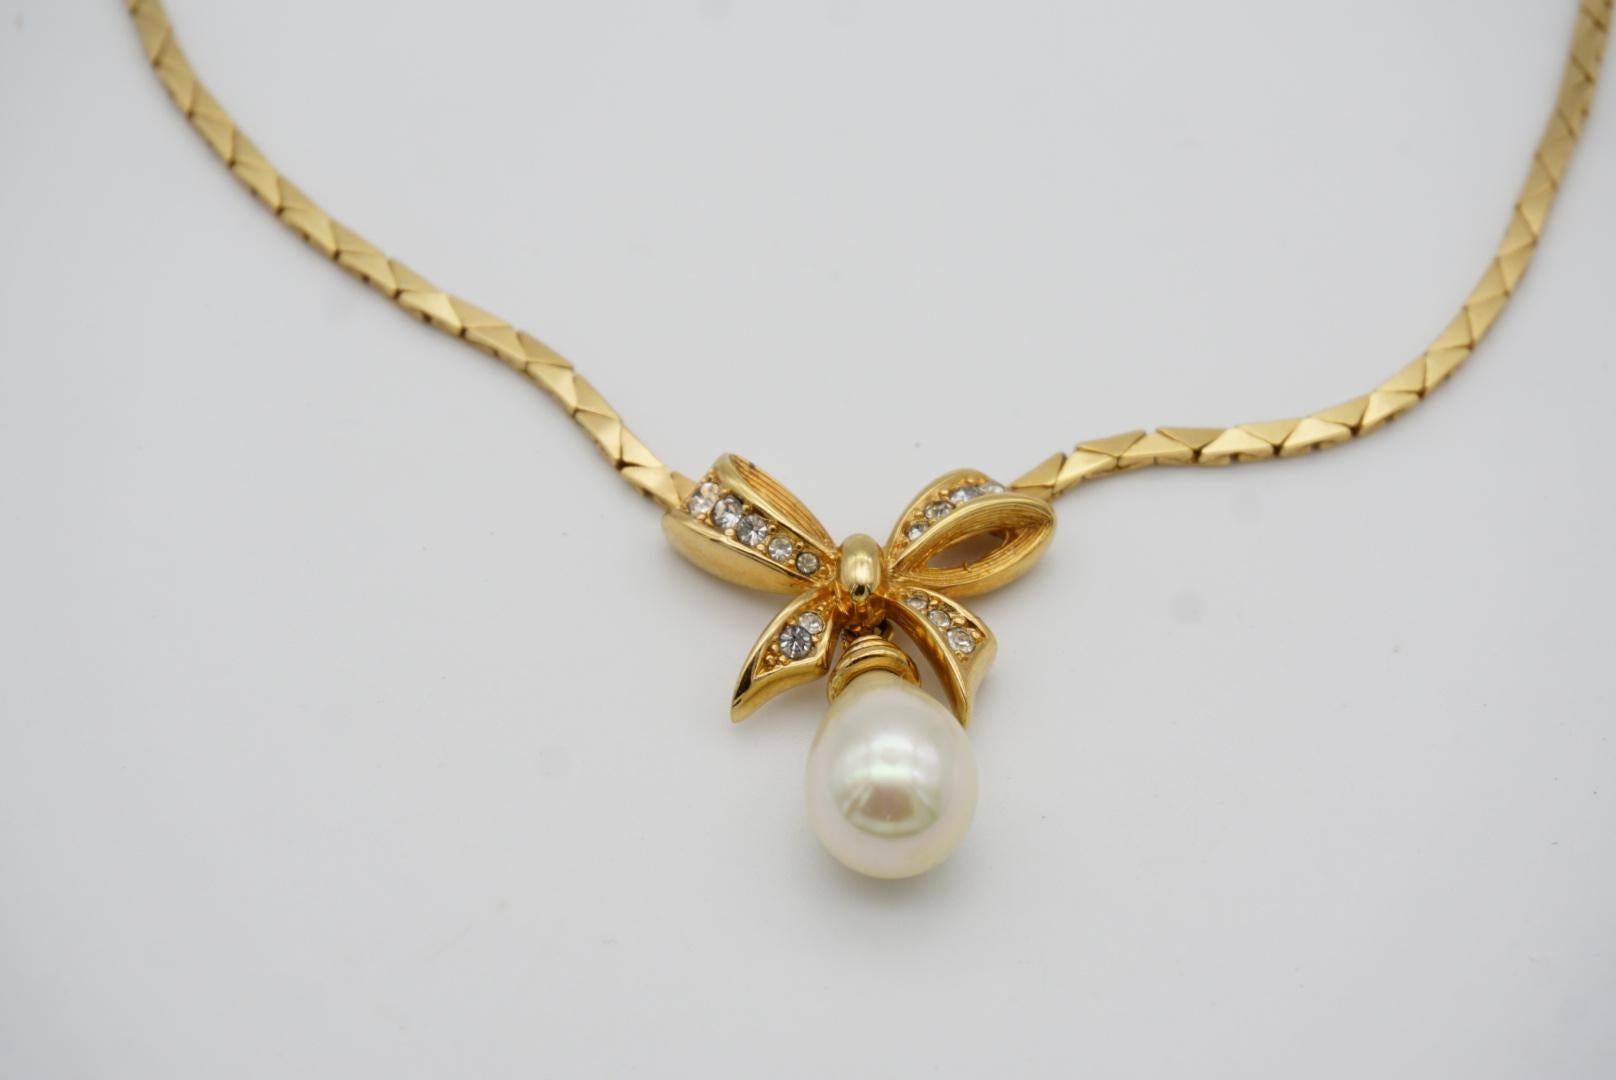 Christian Dior Vintage 1980s Knot Bow Water Drop Pearl Crystals Pendant Necklace For Sale 4